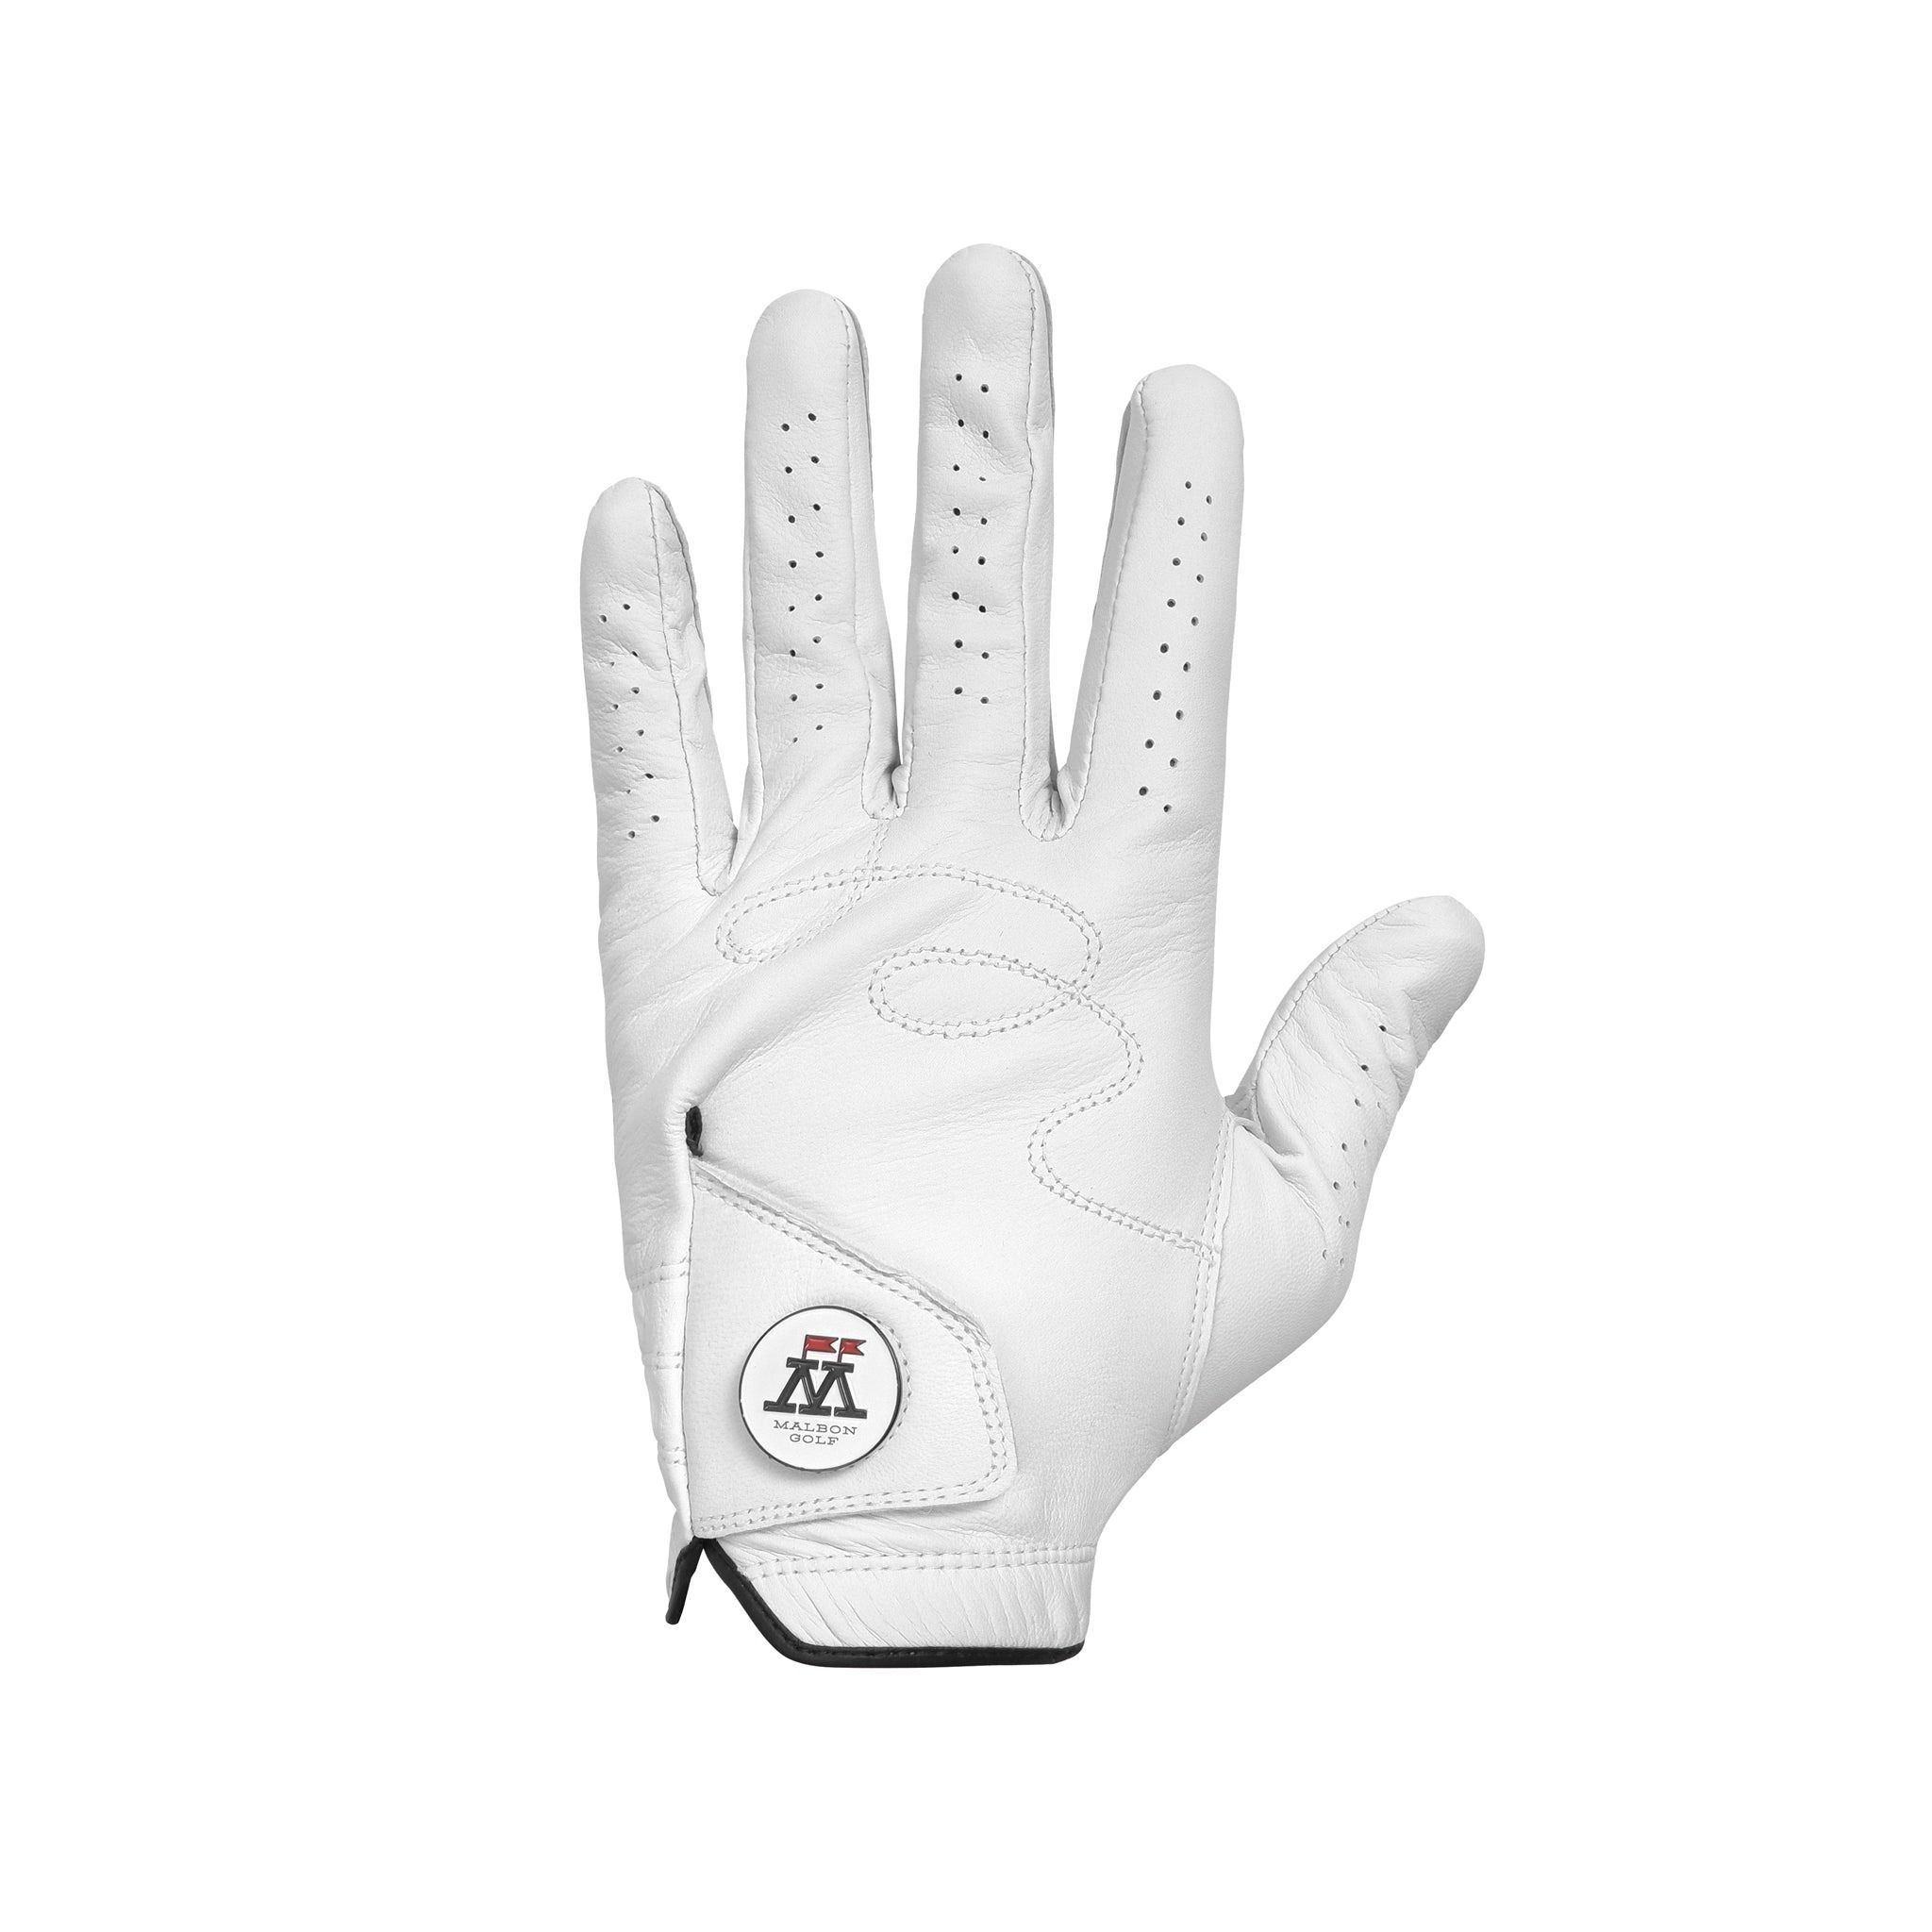 15 Stylish Golf Gloves That Will Have You Playing Your Best Rounds